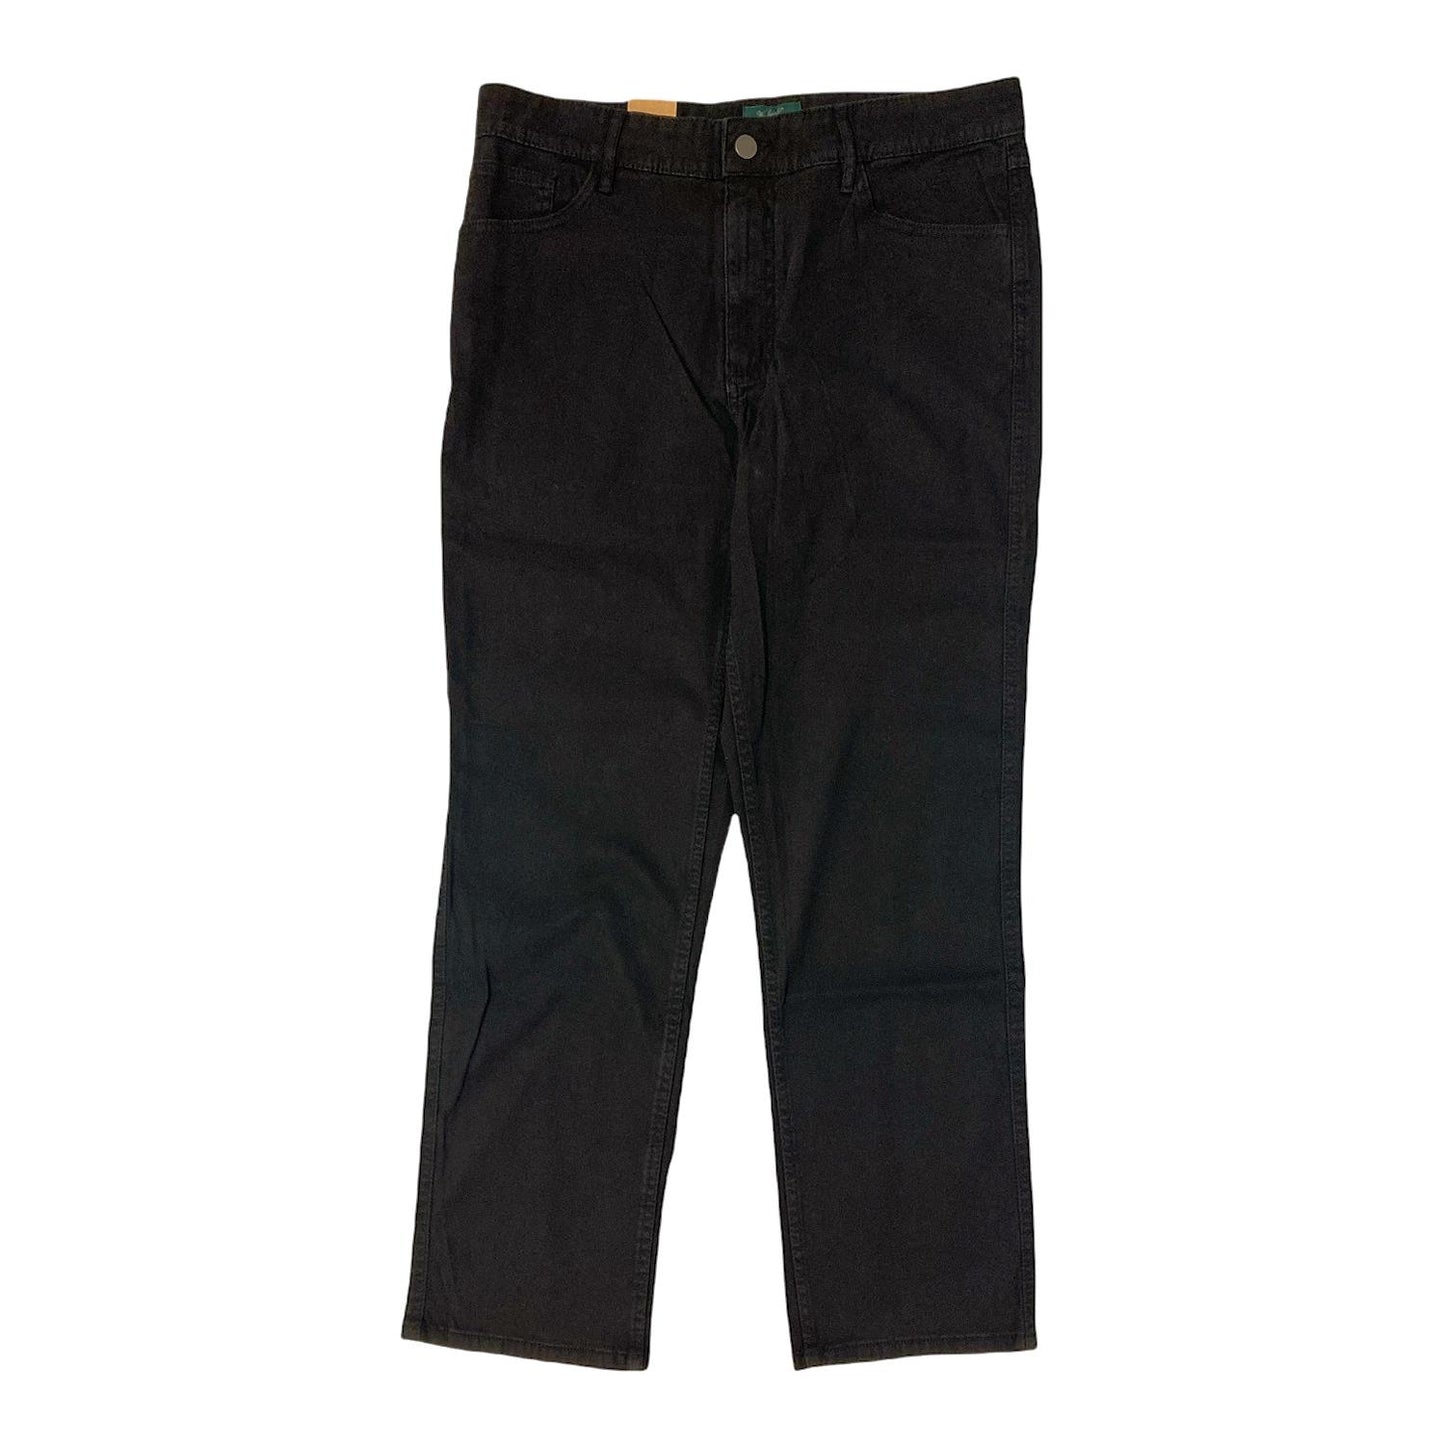 Woolrich Men's Straight Fit Stretch Fabric 5 Pocket Utility Pants